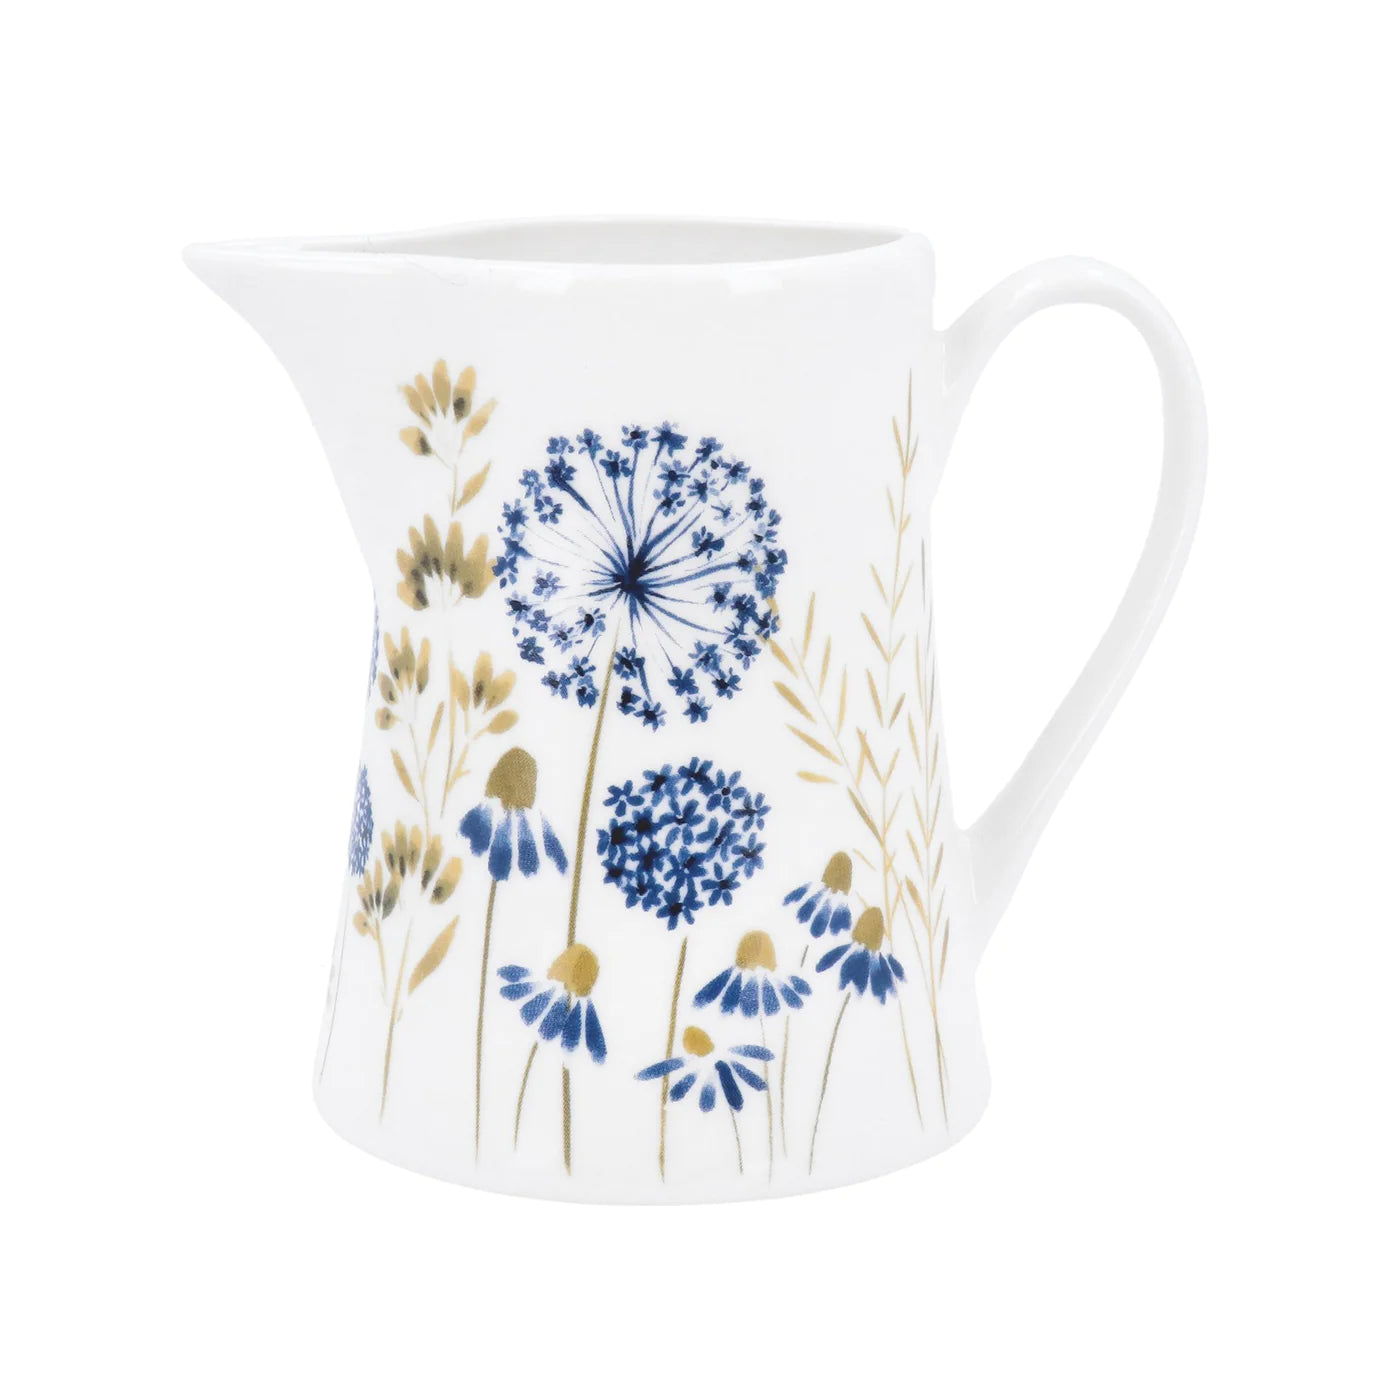 small white bone china milk jug with blue and green floral design